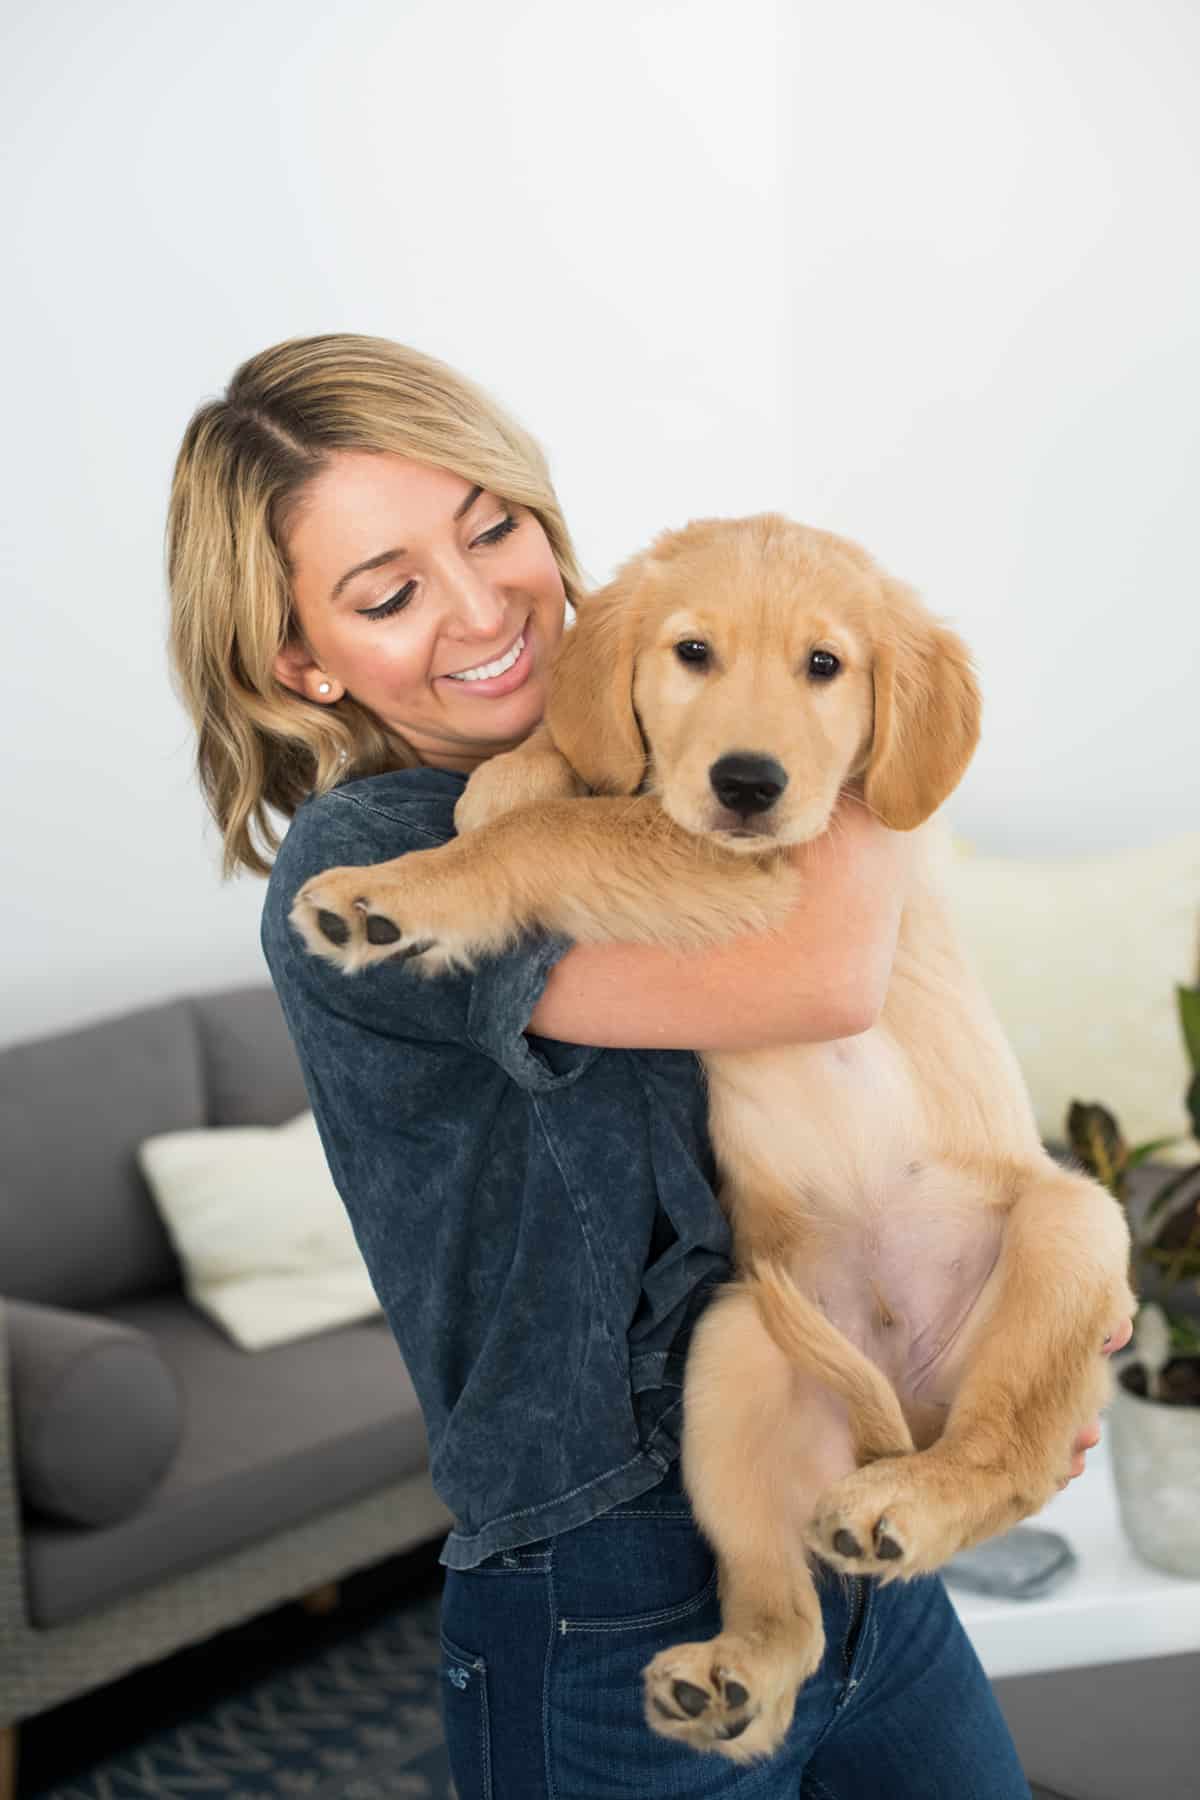 Woman holding a puppy that needed pet insurance.